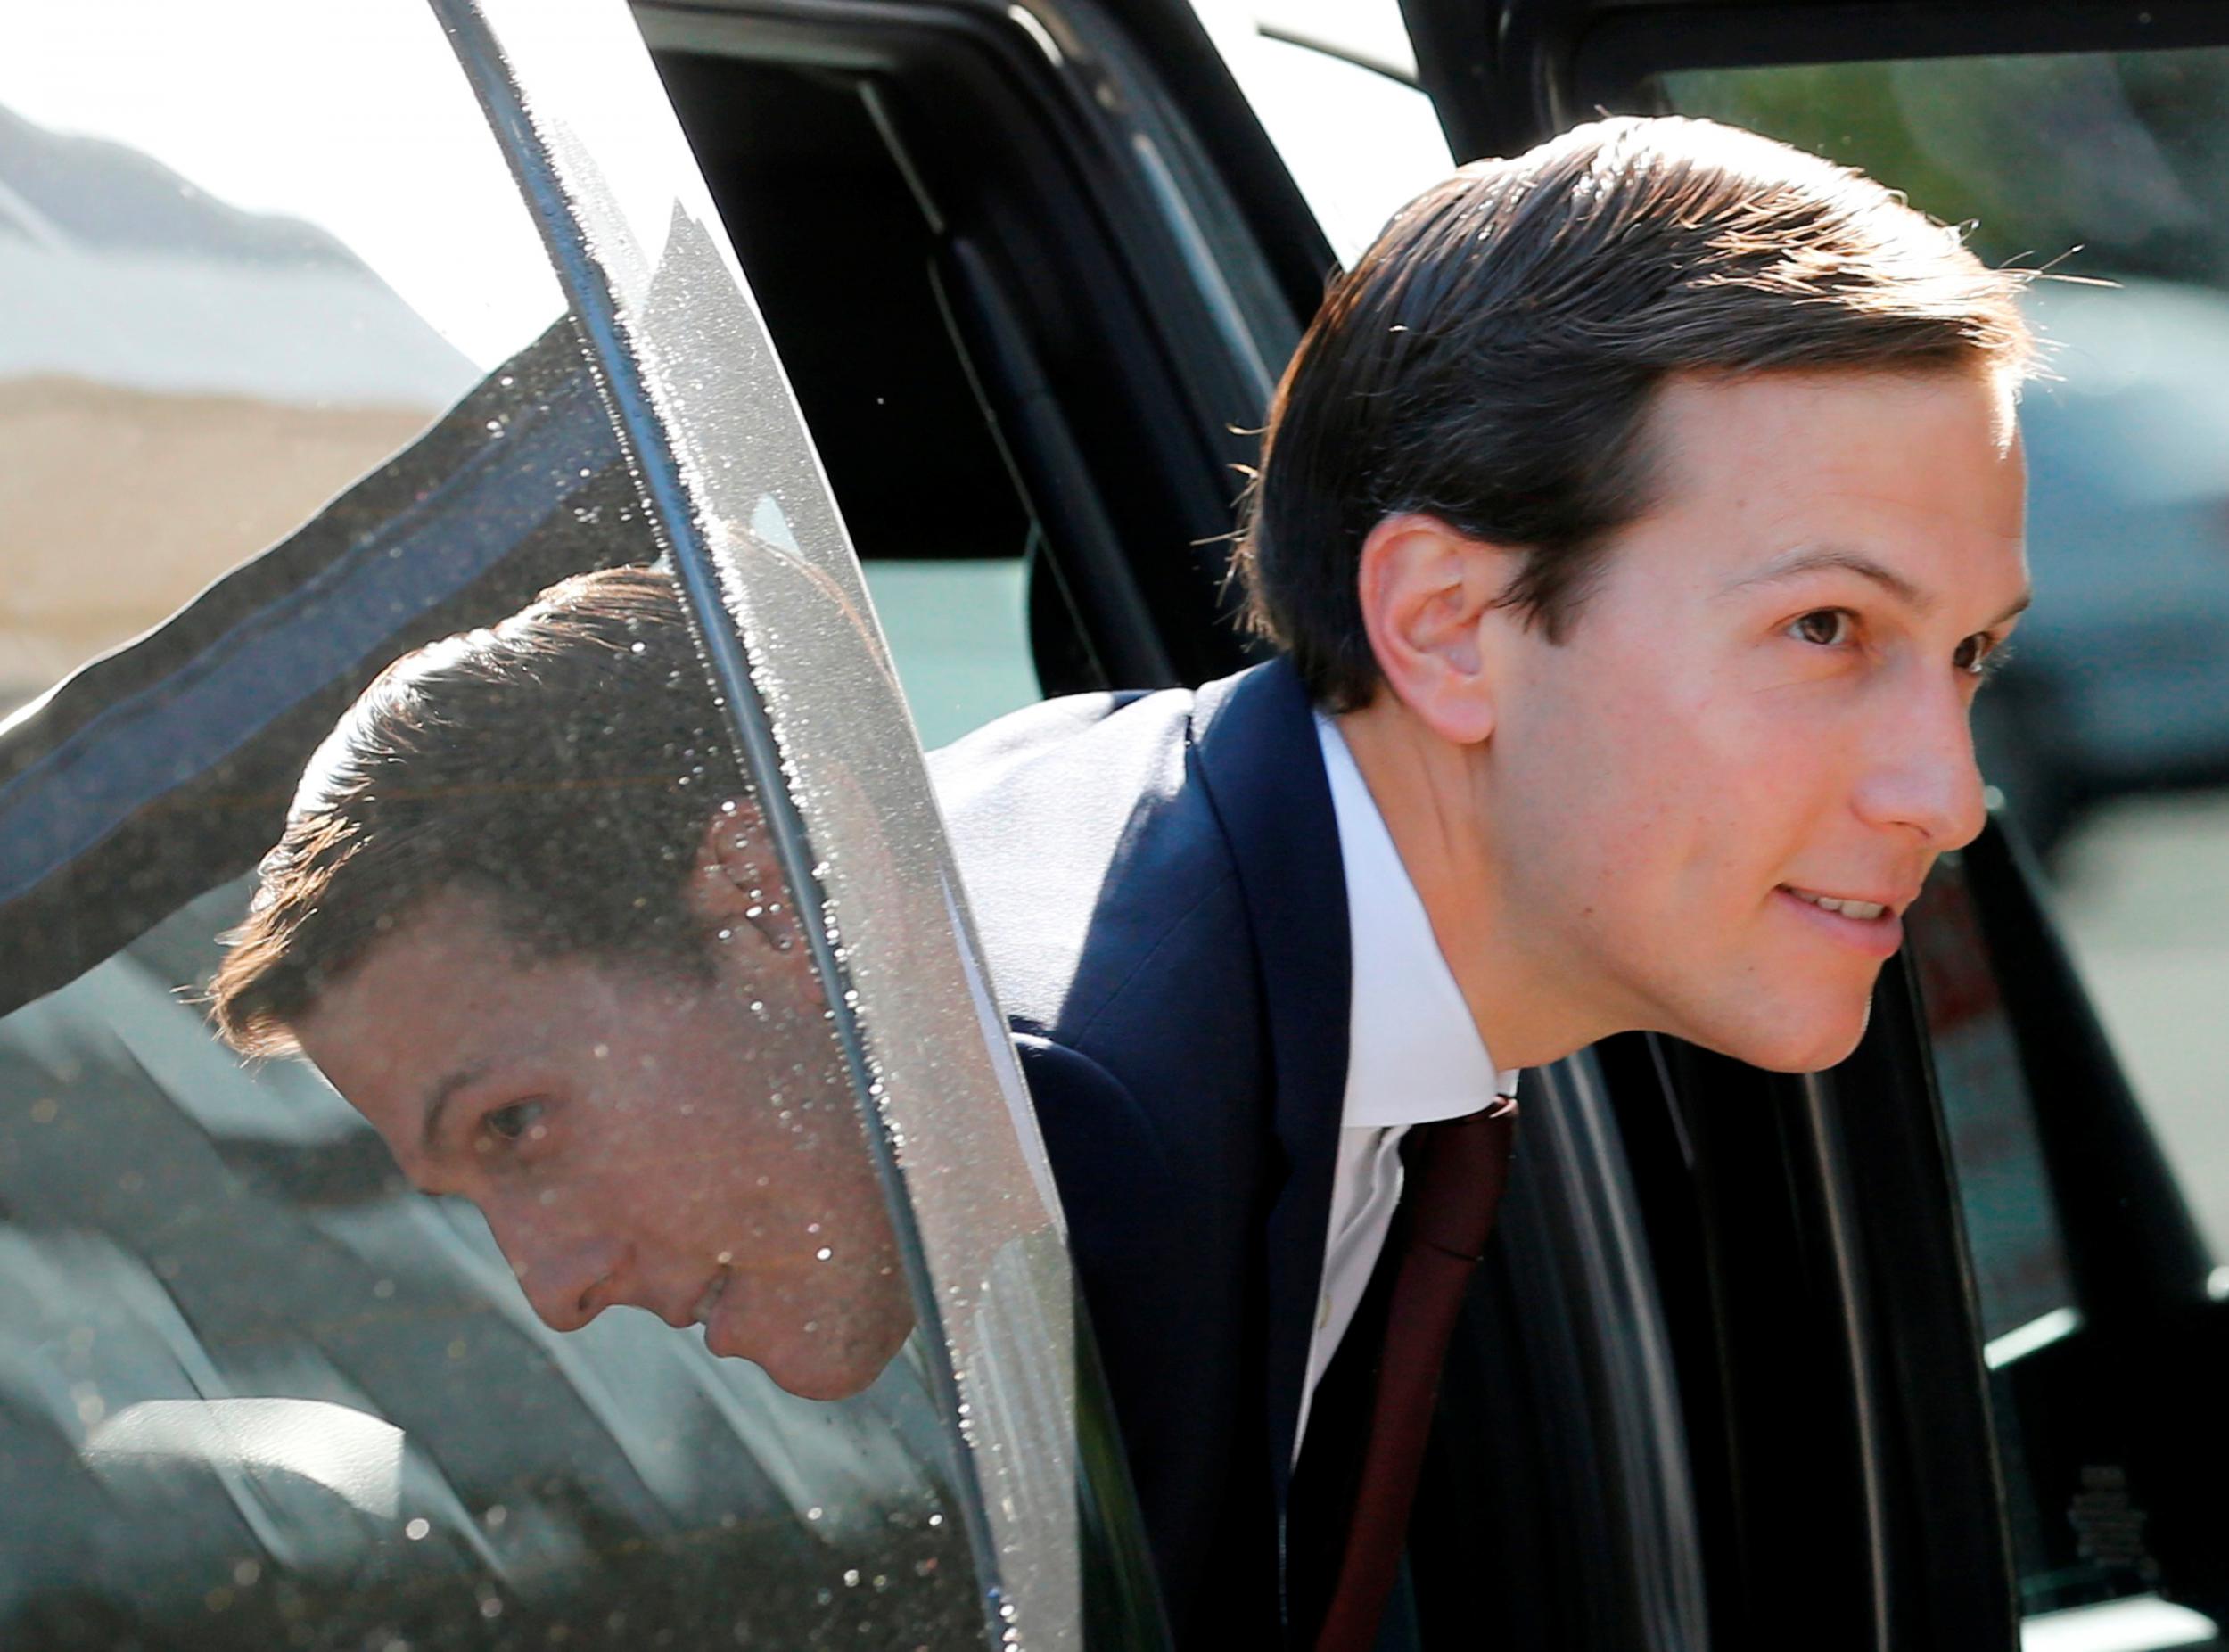 Jared Kushner has seemingly avoided receiving a summons over a lawsuit accusing him of Russian collusion during the 2016 presidential election.